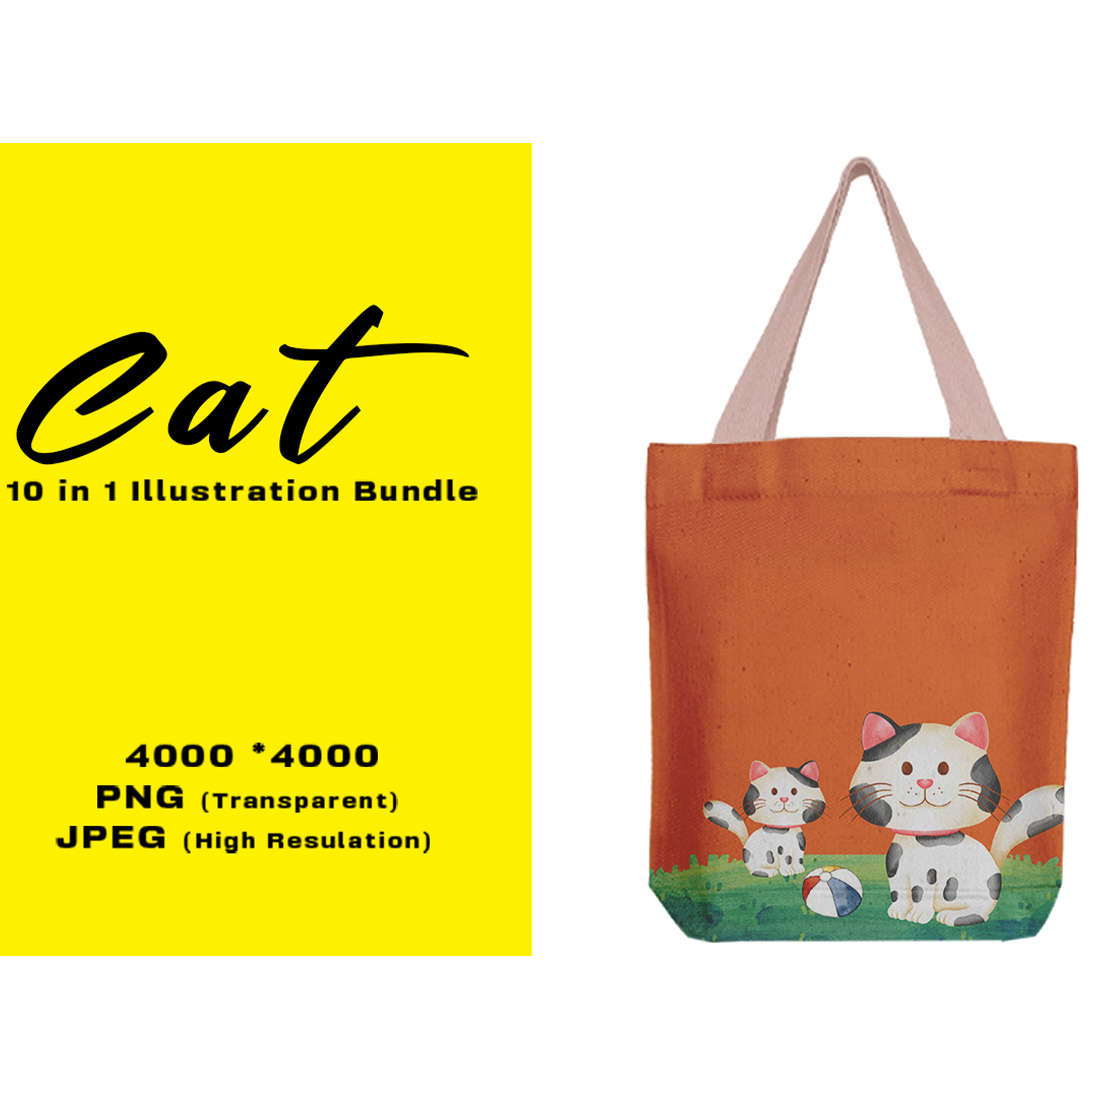 Image of bag with amazing print with cat